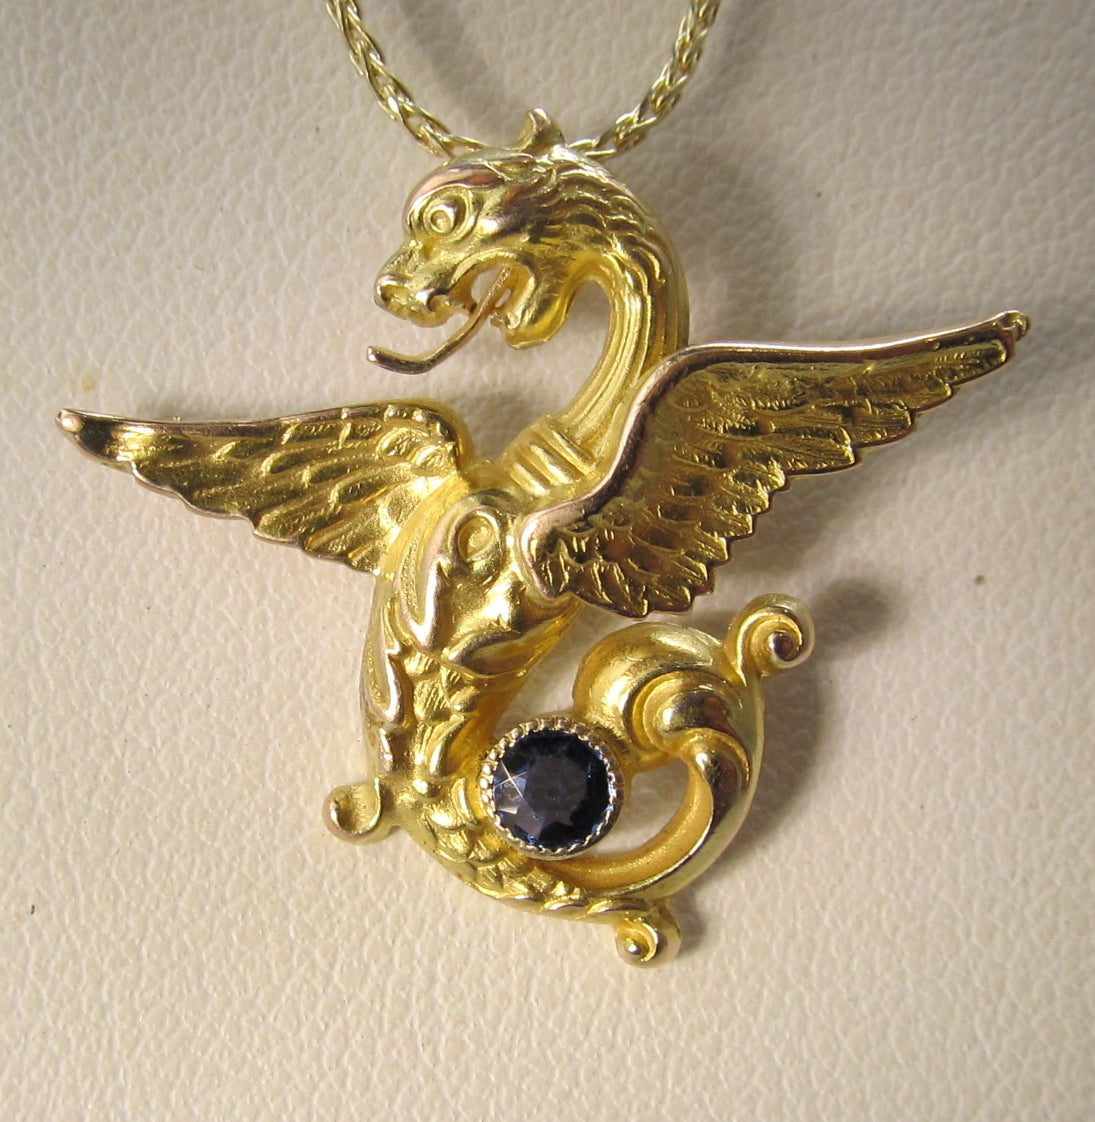 Antique 14k yellow gold griffin necklace with a sapphire, circa 1900